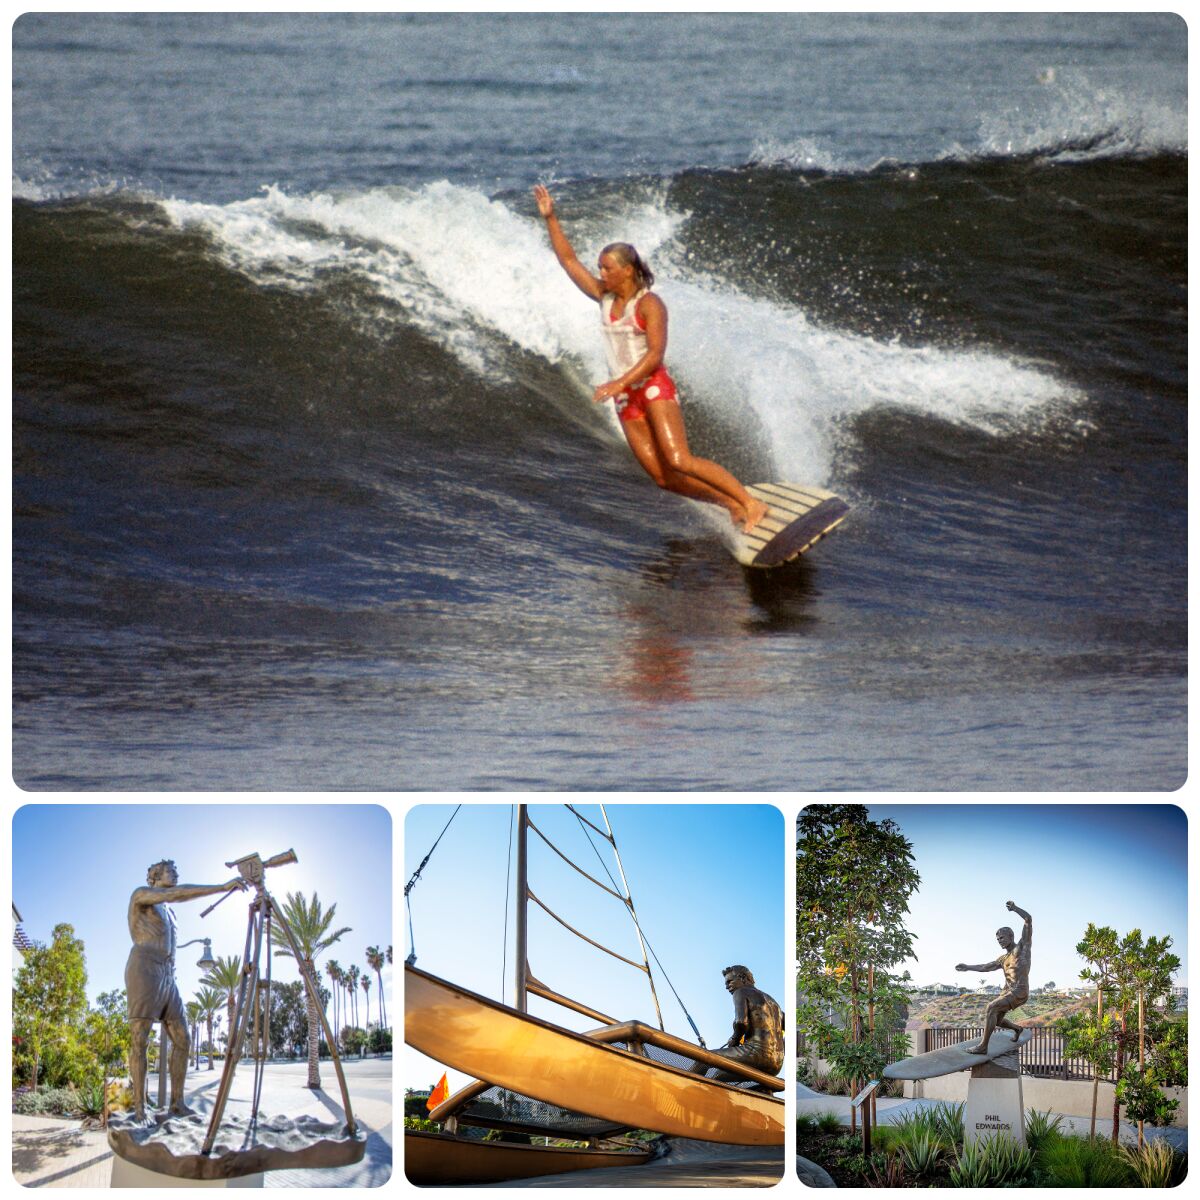 A collage of a woman surfing and three statues.